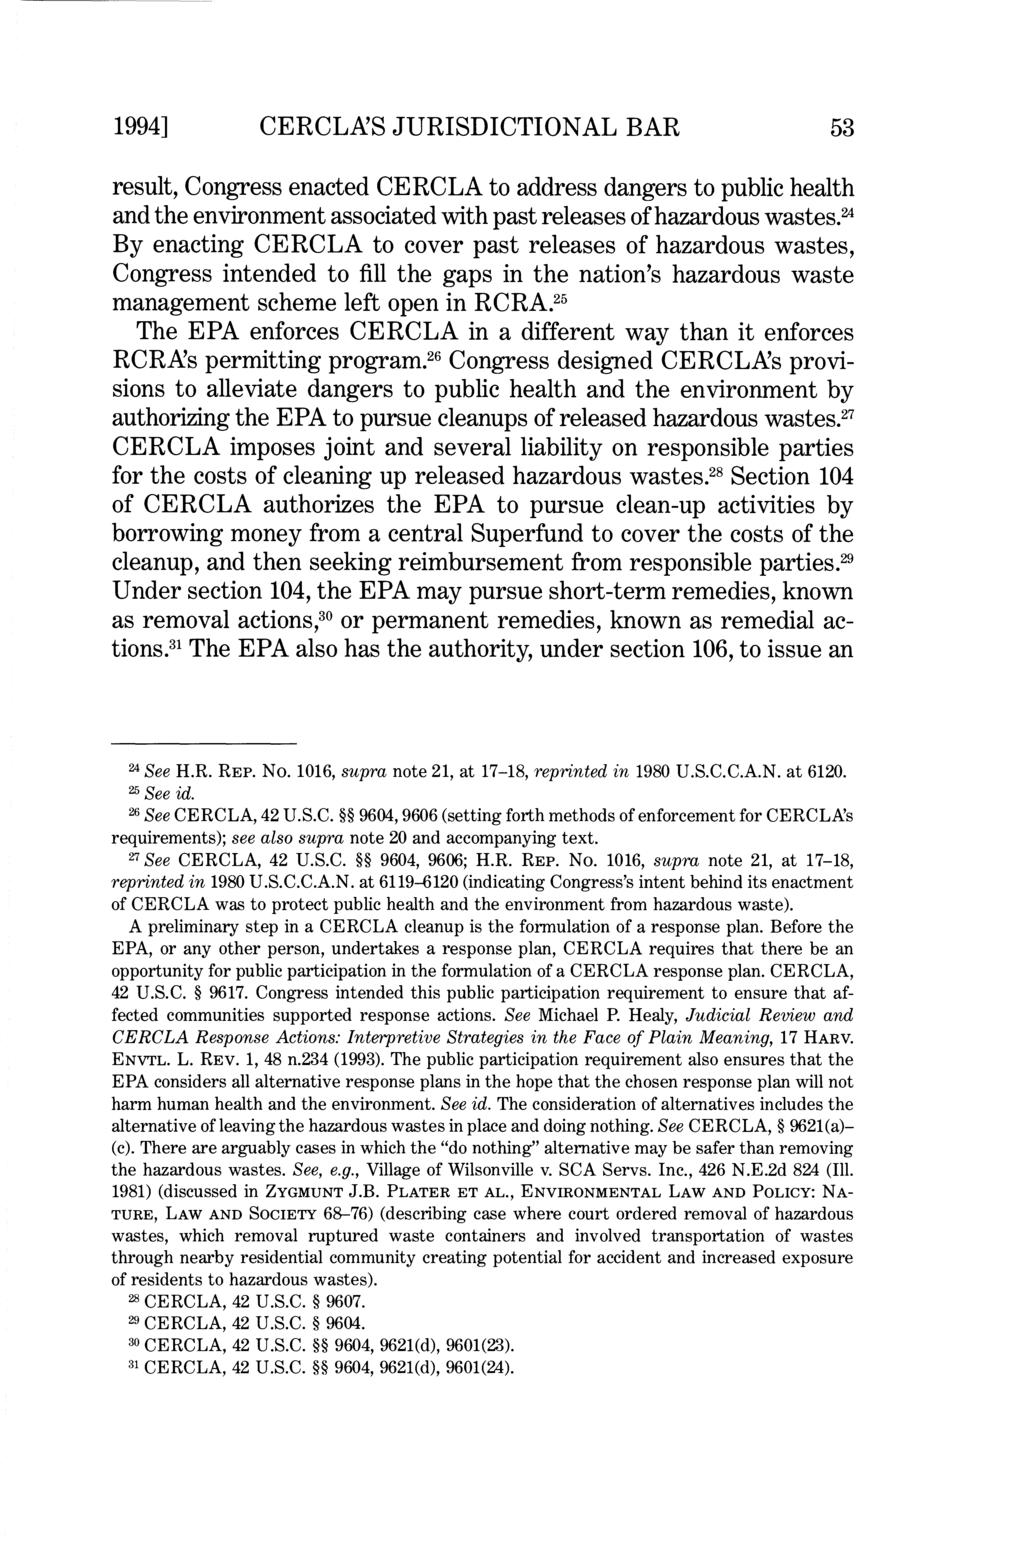 1994] CERCLNS JURISDICTIONAL BAR 53 result, Congress enacted CERCLA to address dangers to public health and the environment associated with past releases of hazardous wastes.